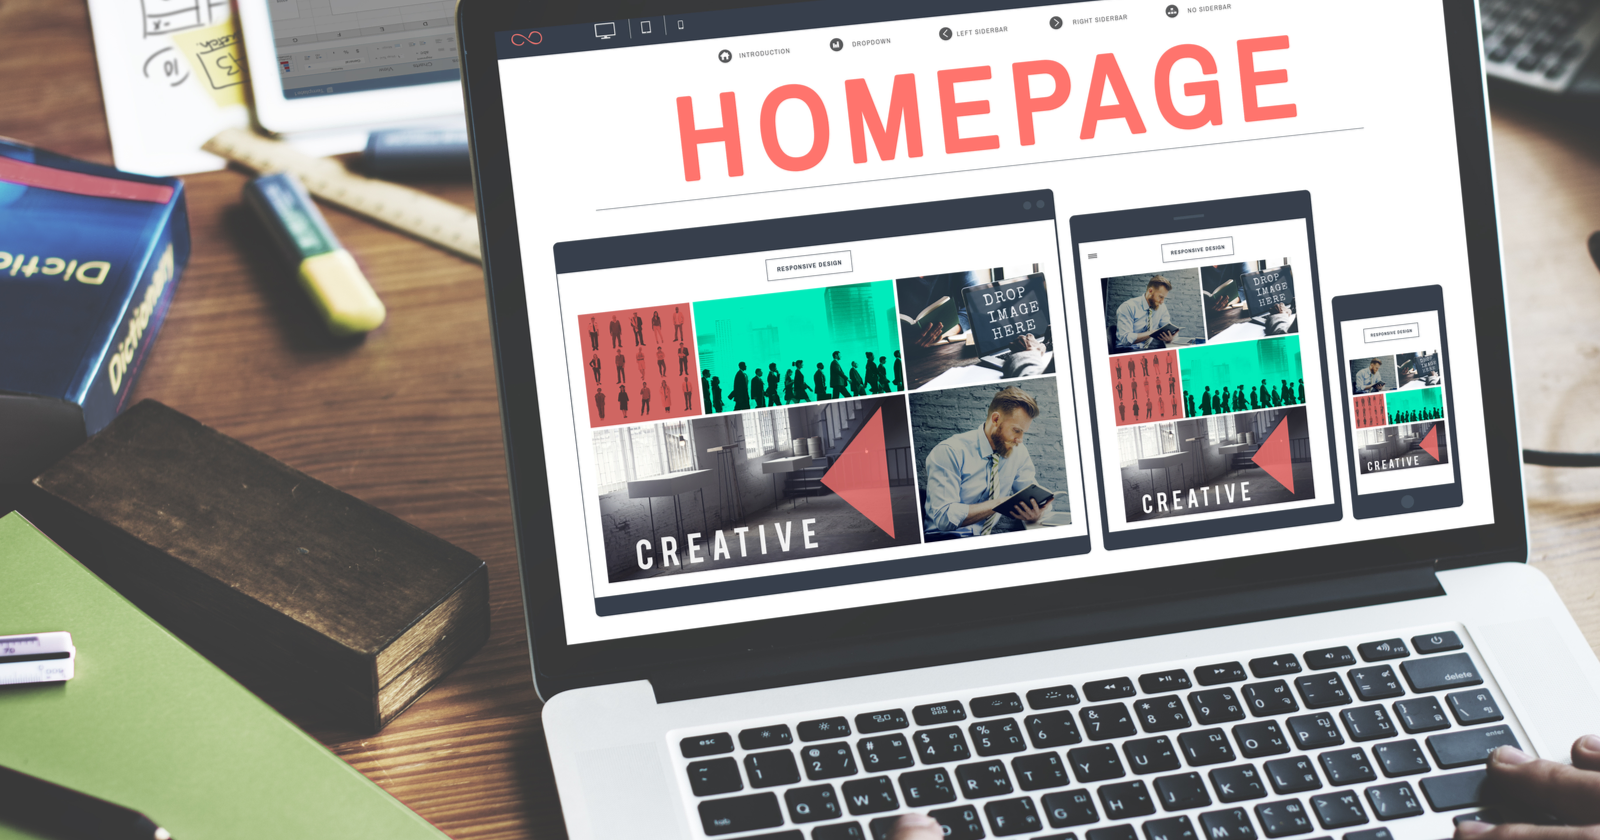 25-of-the-best-examples-of-home-pages-5dc504205de2e